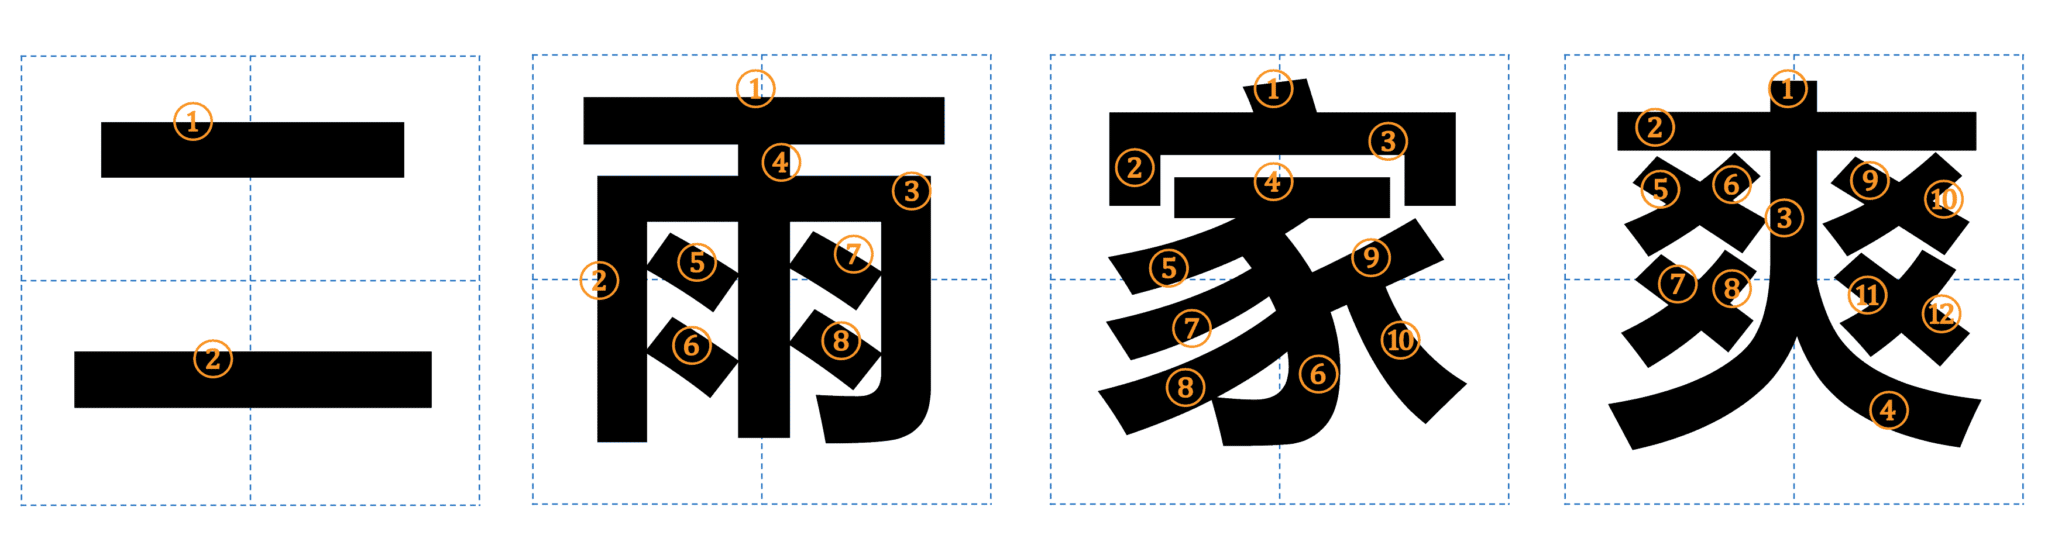 Sample Chinese characters